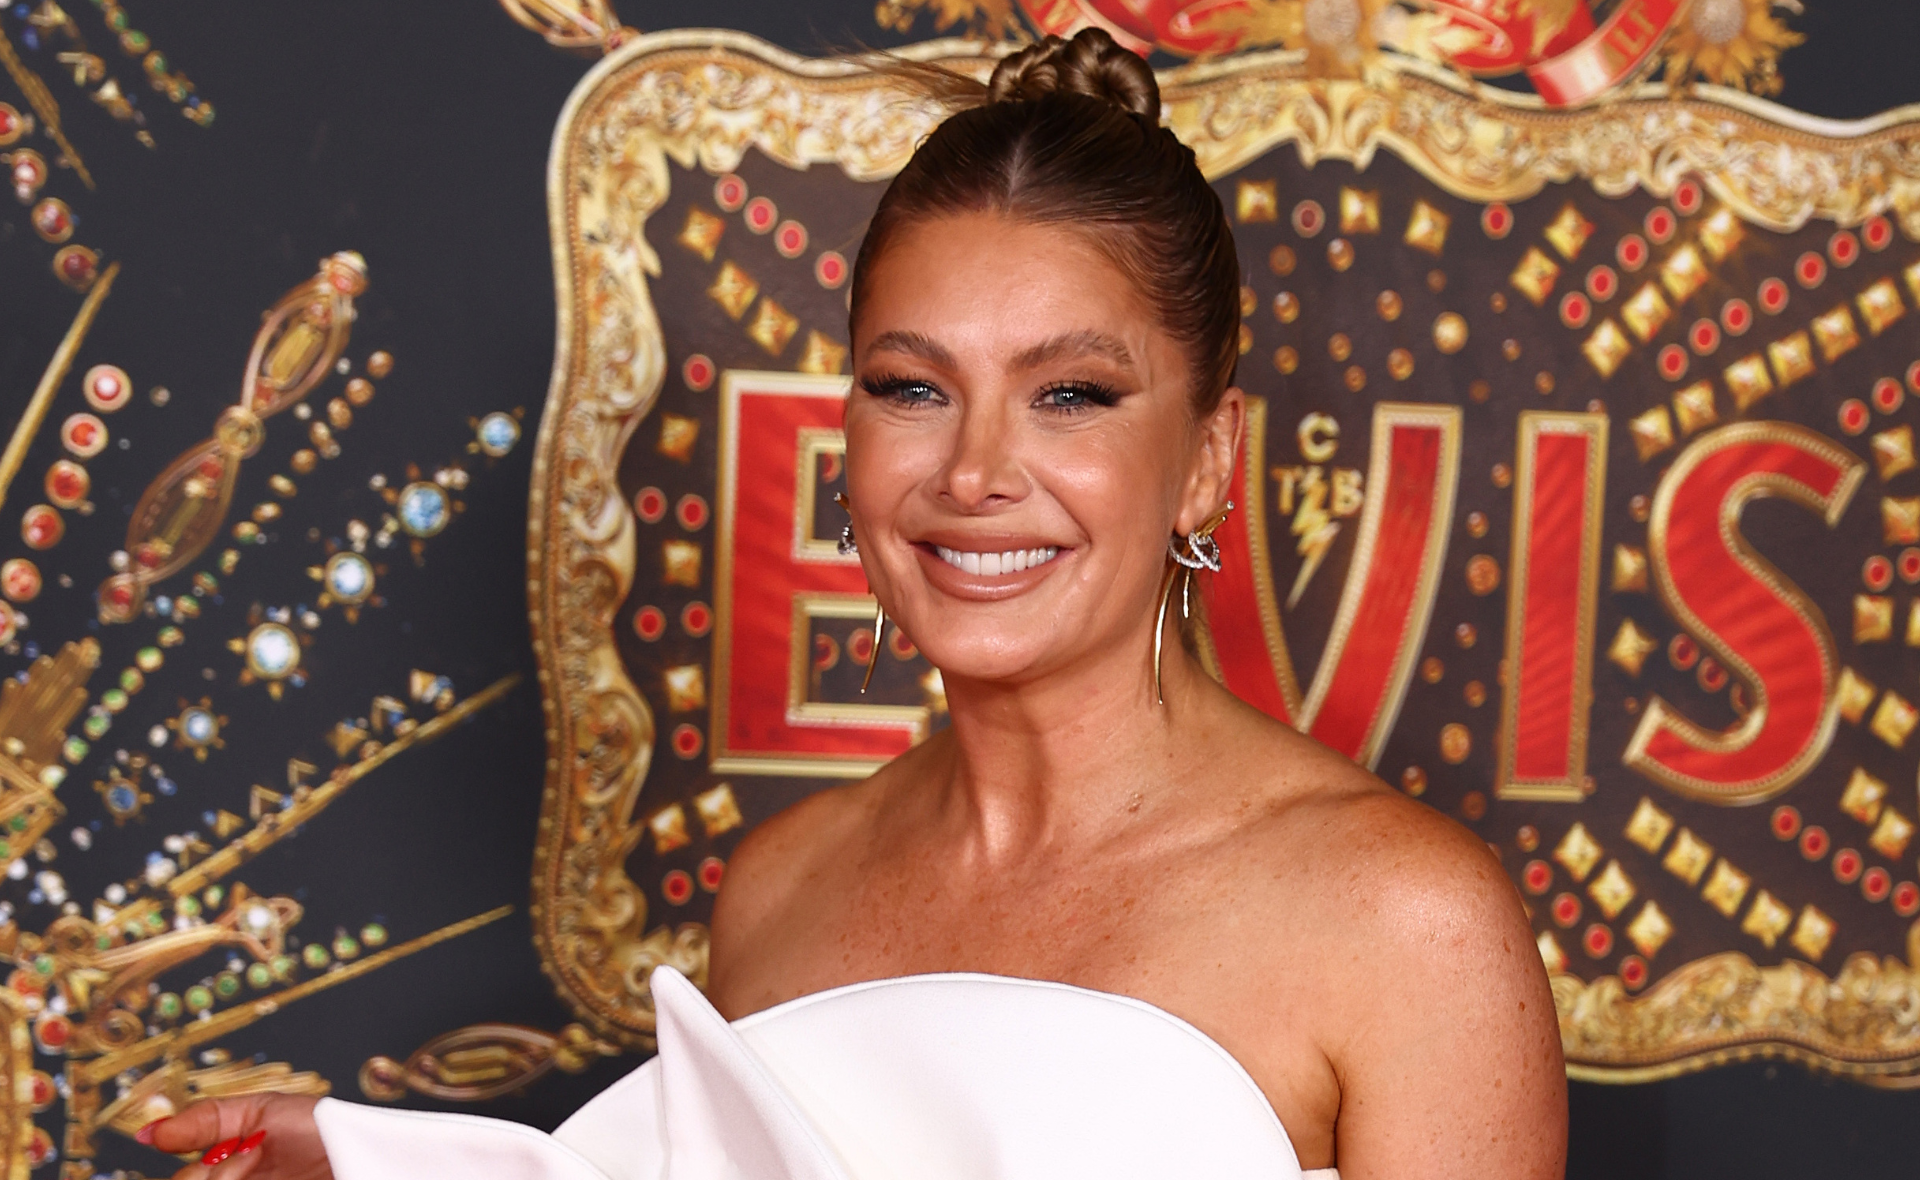 Natalie Bassingthwaighte confirms she’s in a “beautiful relationship”